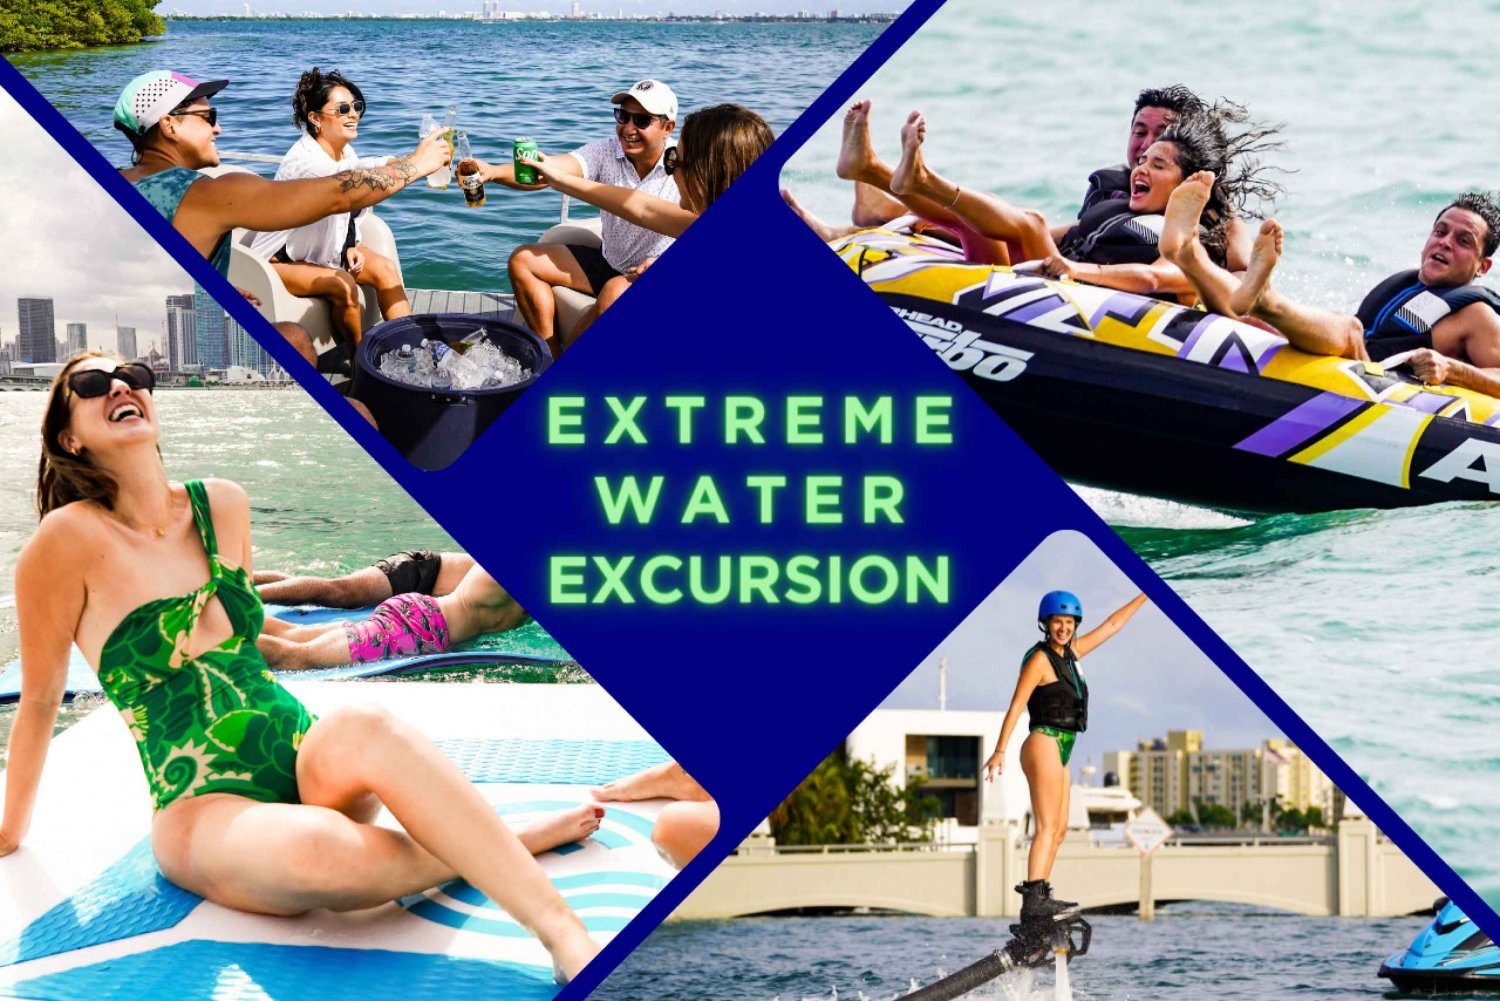 Aqua Excursion - Flyboard + Tubing + Bootstour